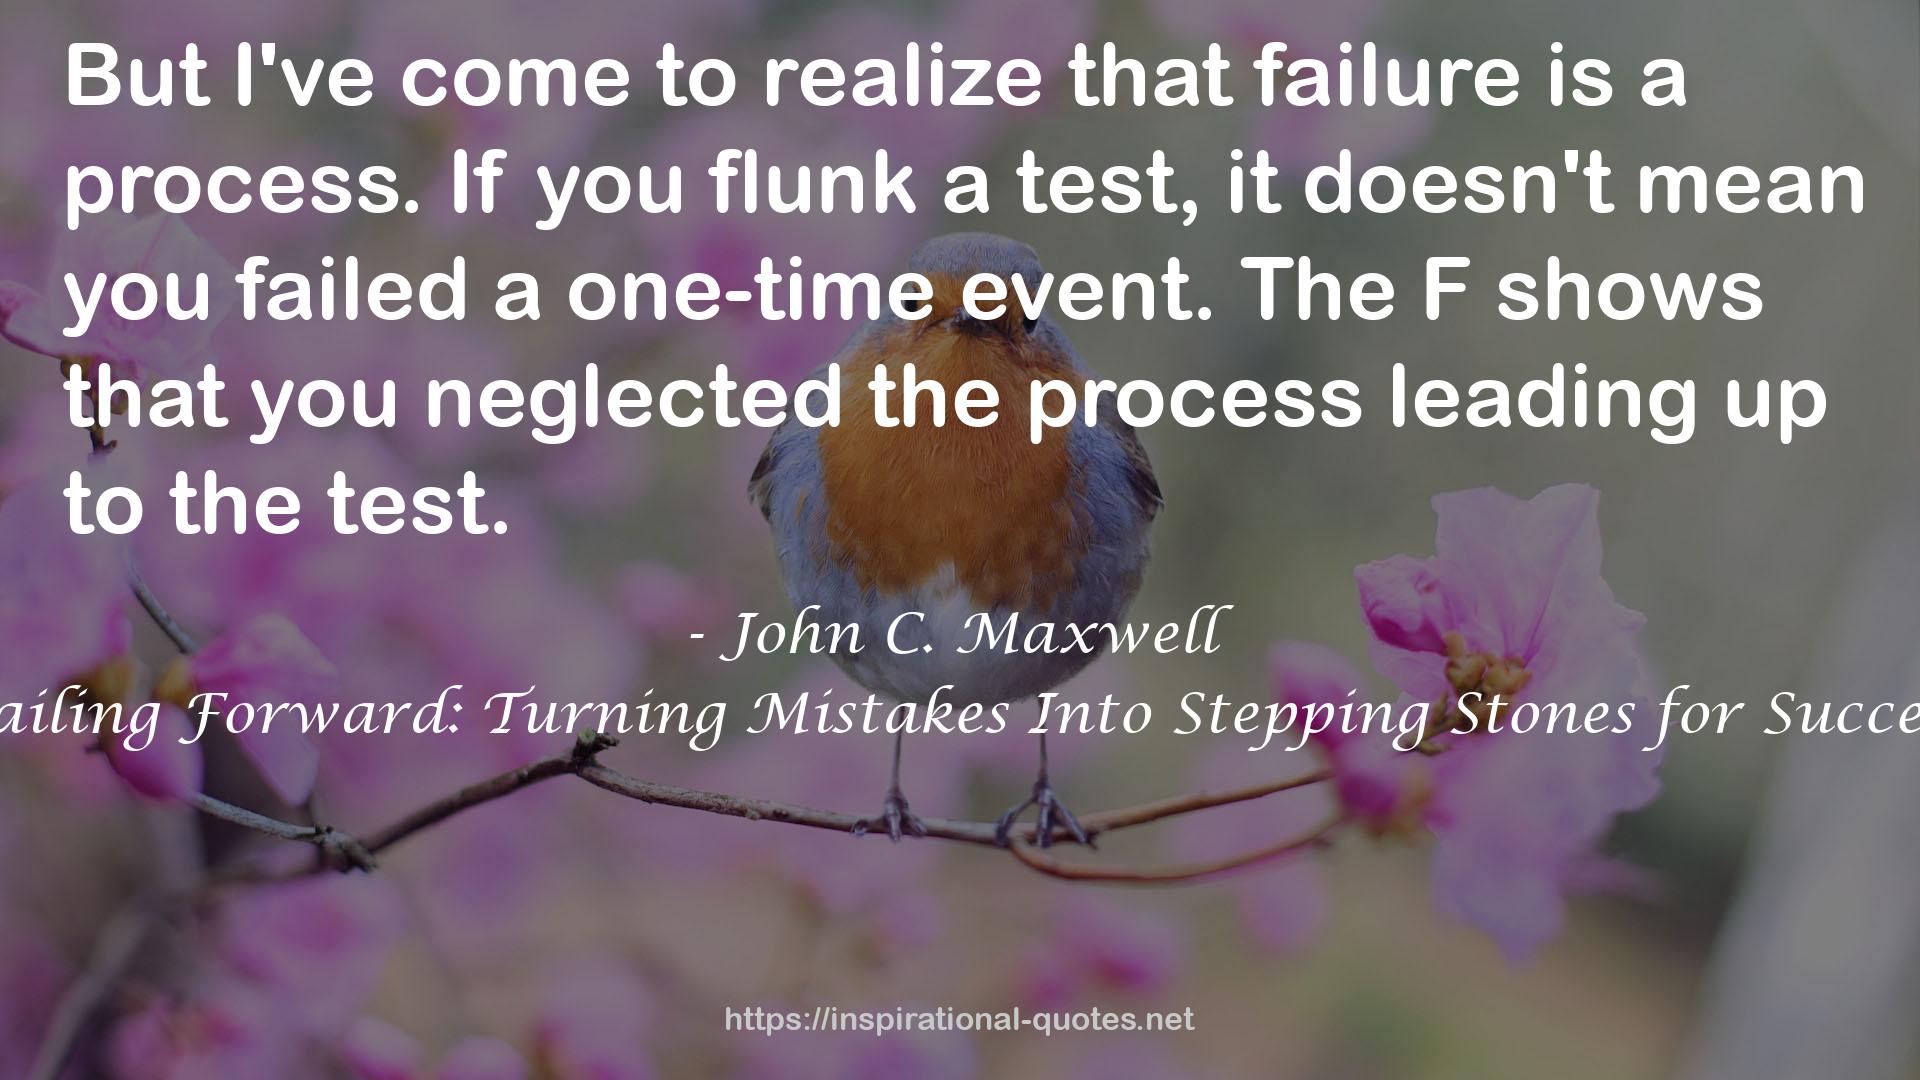 Failing Forward: Turning Mistakes Into Stepping Stones for Success QUOTES